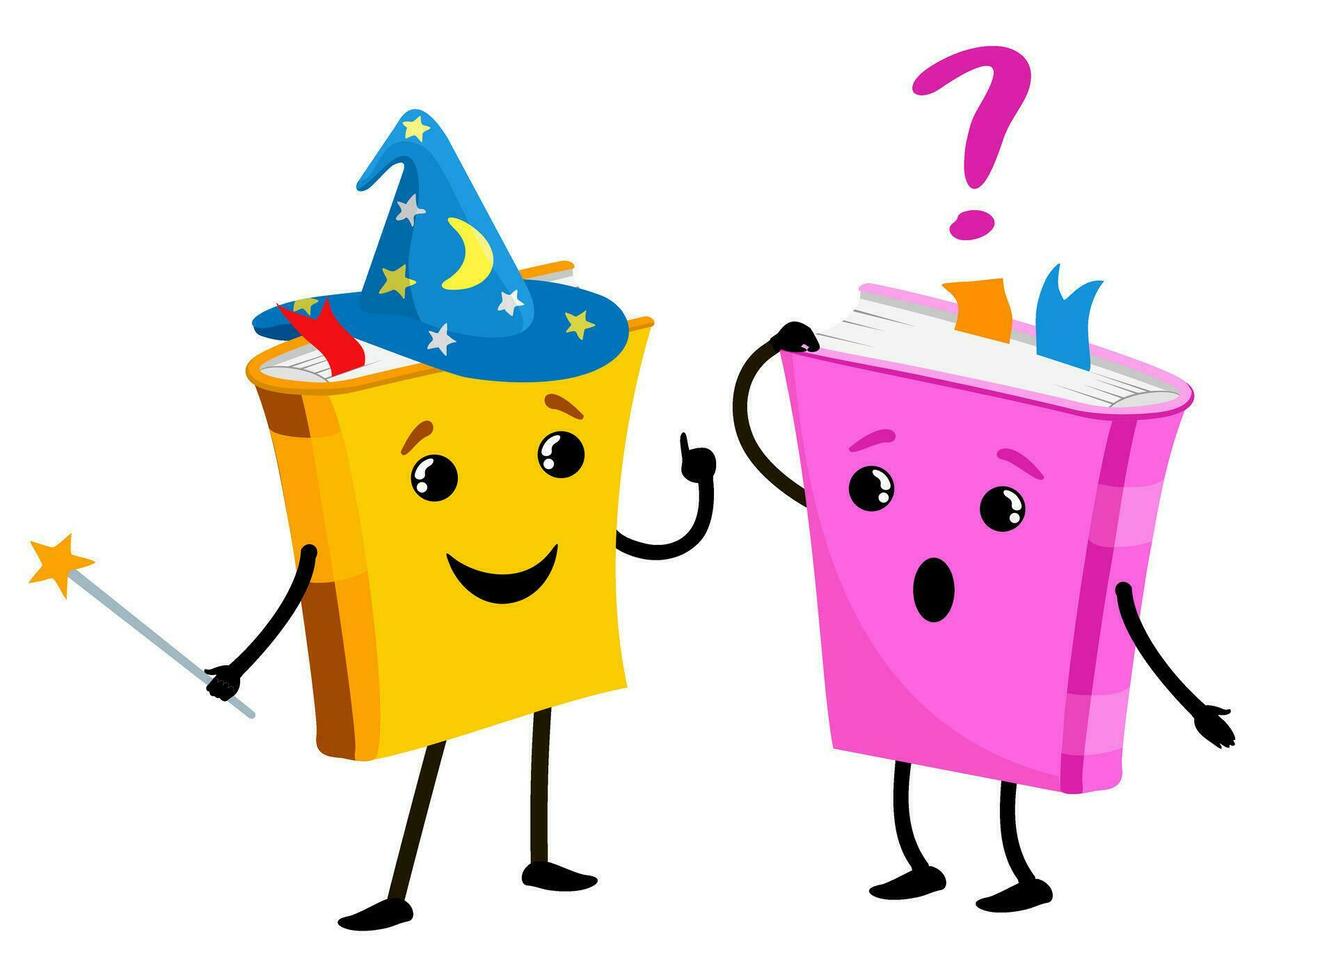 Cute book character. Books talk to each other. ook characters, mascots, cartoon vector. Childish books with smiling faces, arms and legs, education concept. vector